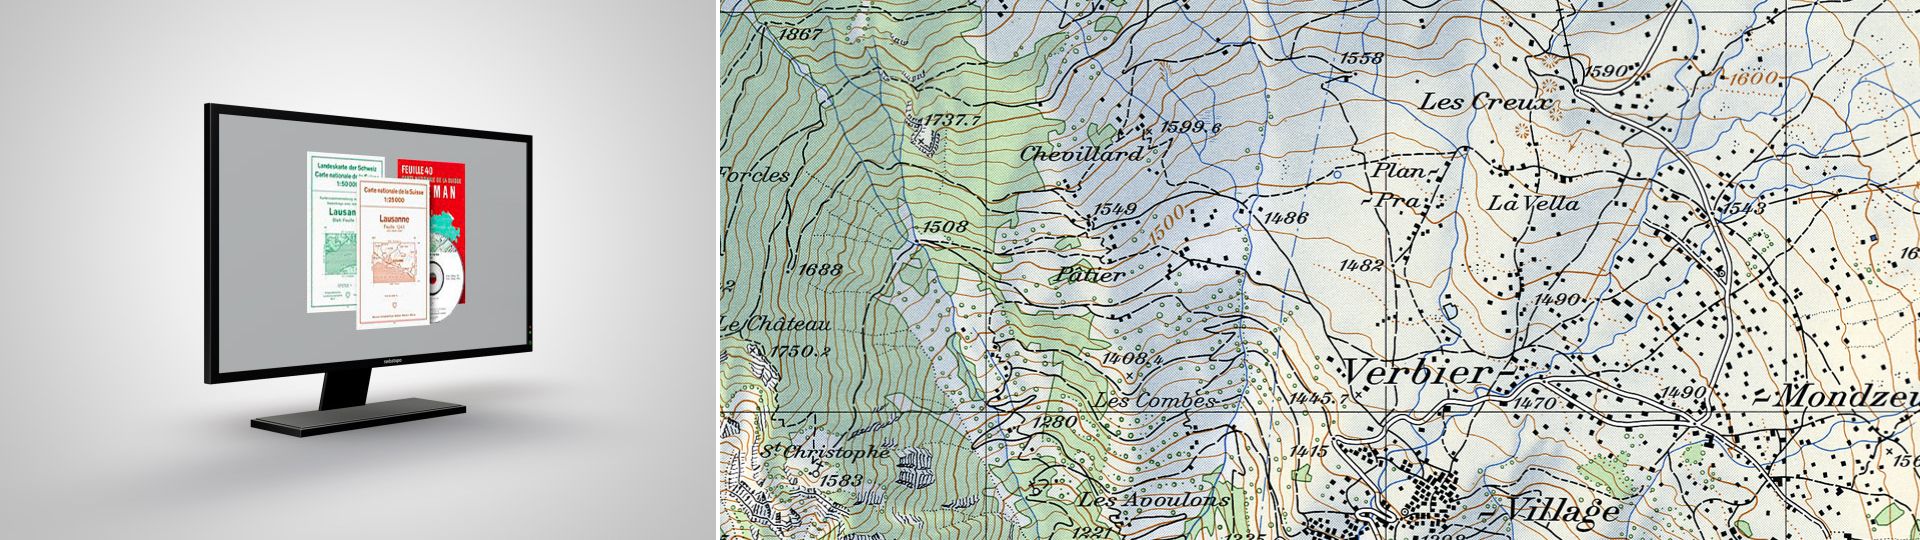 Old National Maps: georeferenced old National Map 1:25,000 / 1:50,000 / 1:100,000